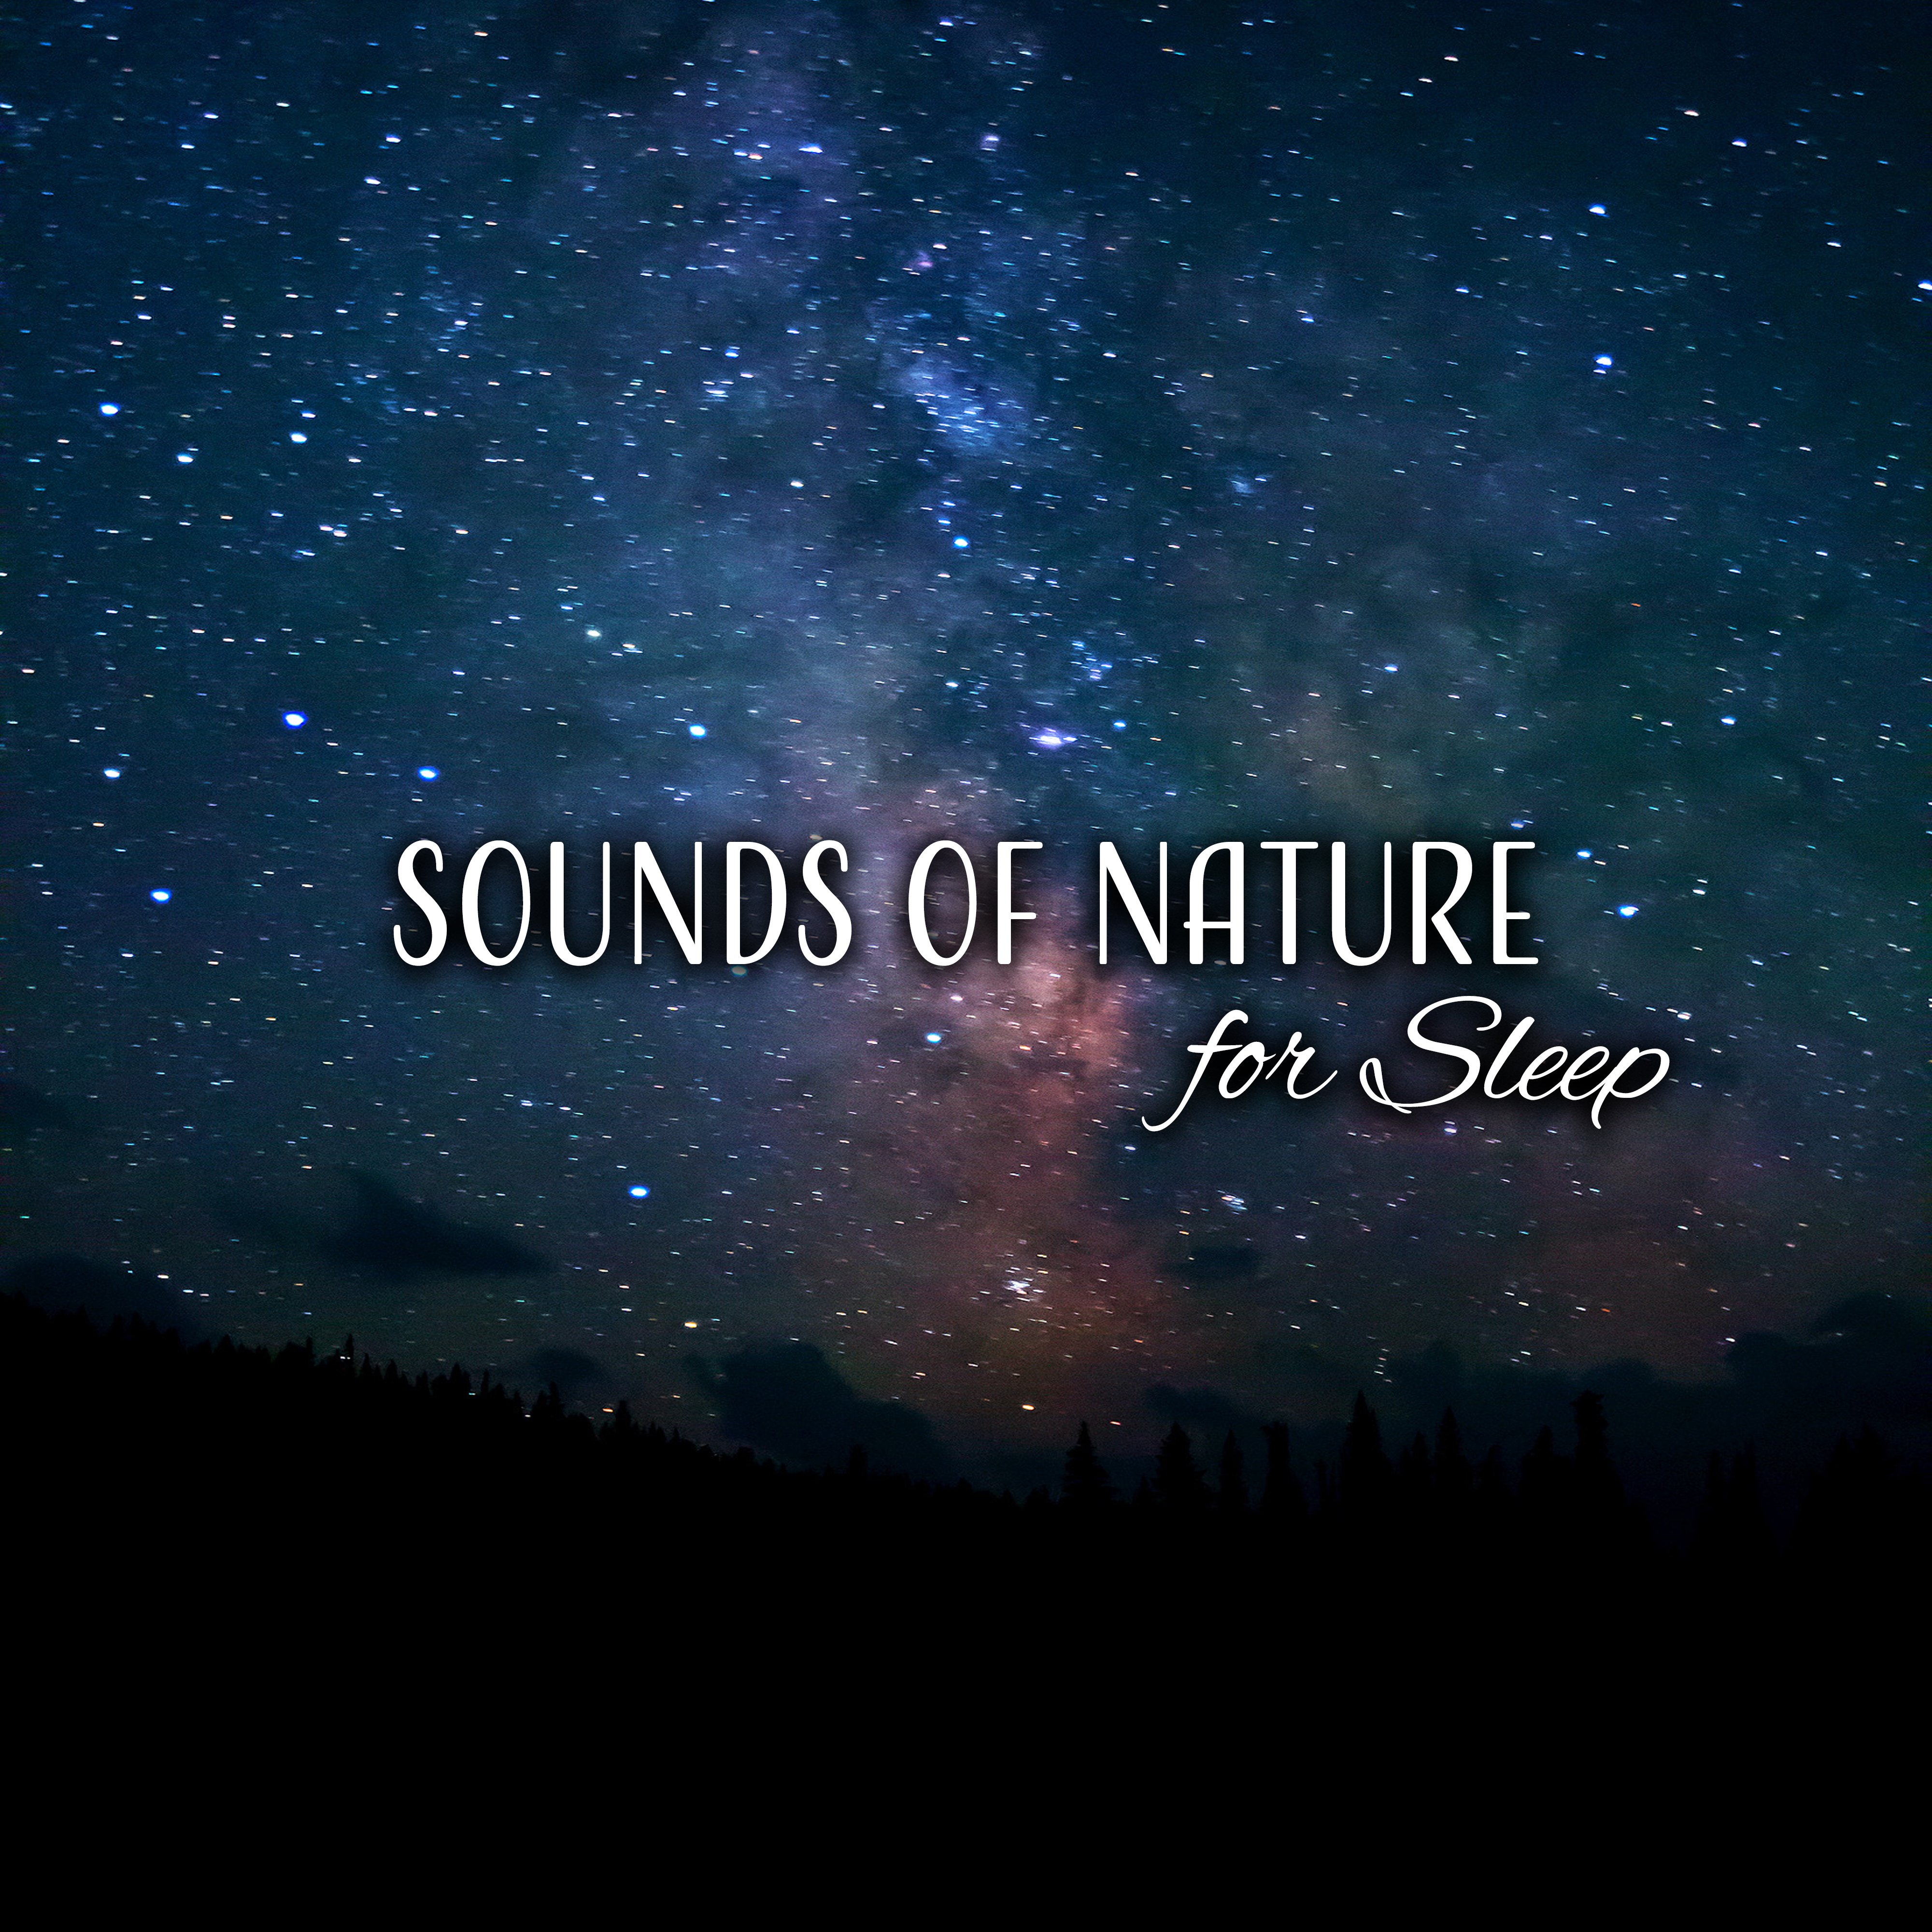 Sounds of Nature for Sleep – Peaceful Music, Soft Lullabies, Relax at Night, Restful Sleep, Nature Sounds